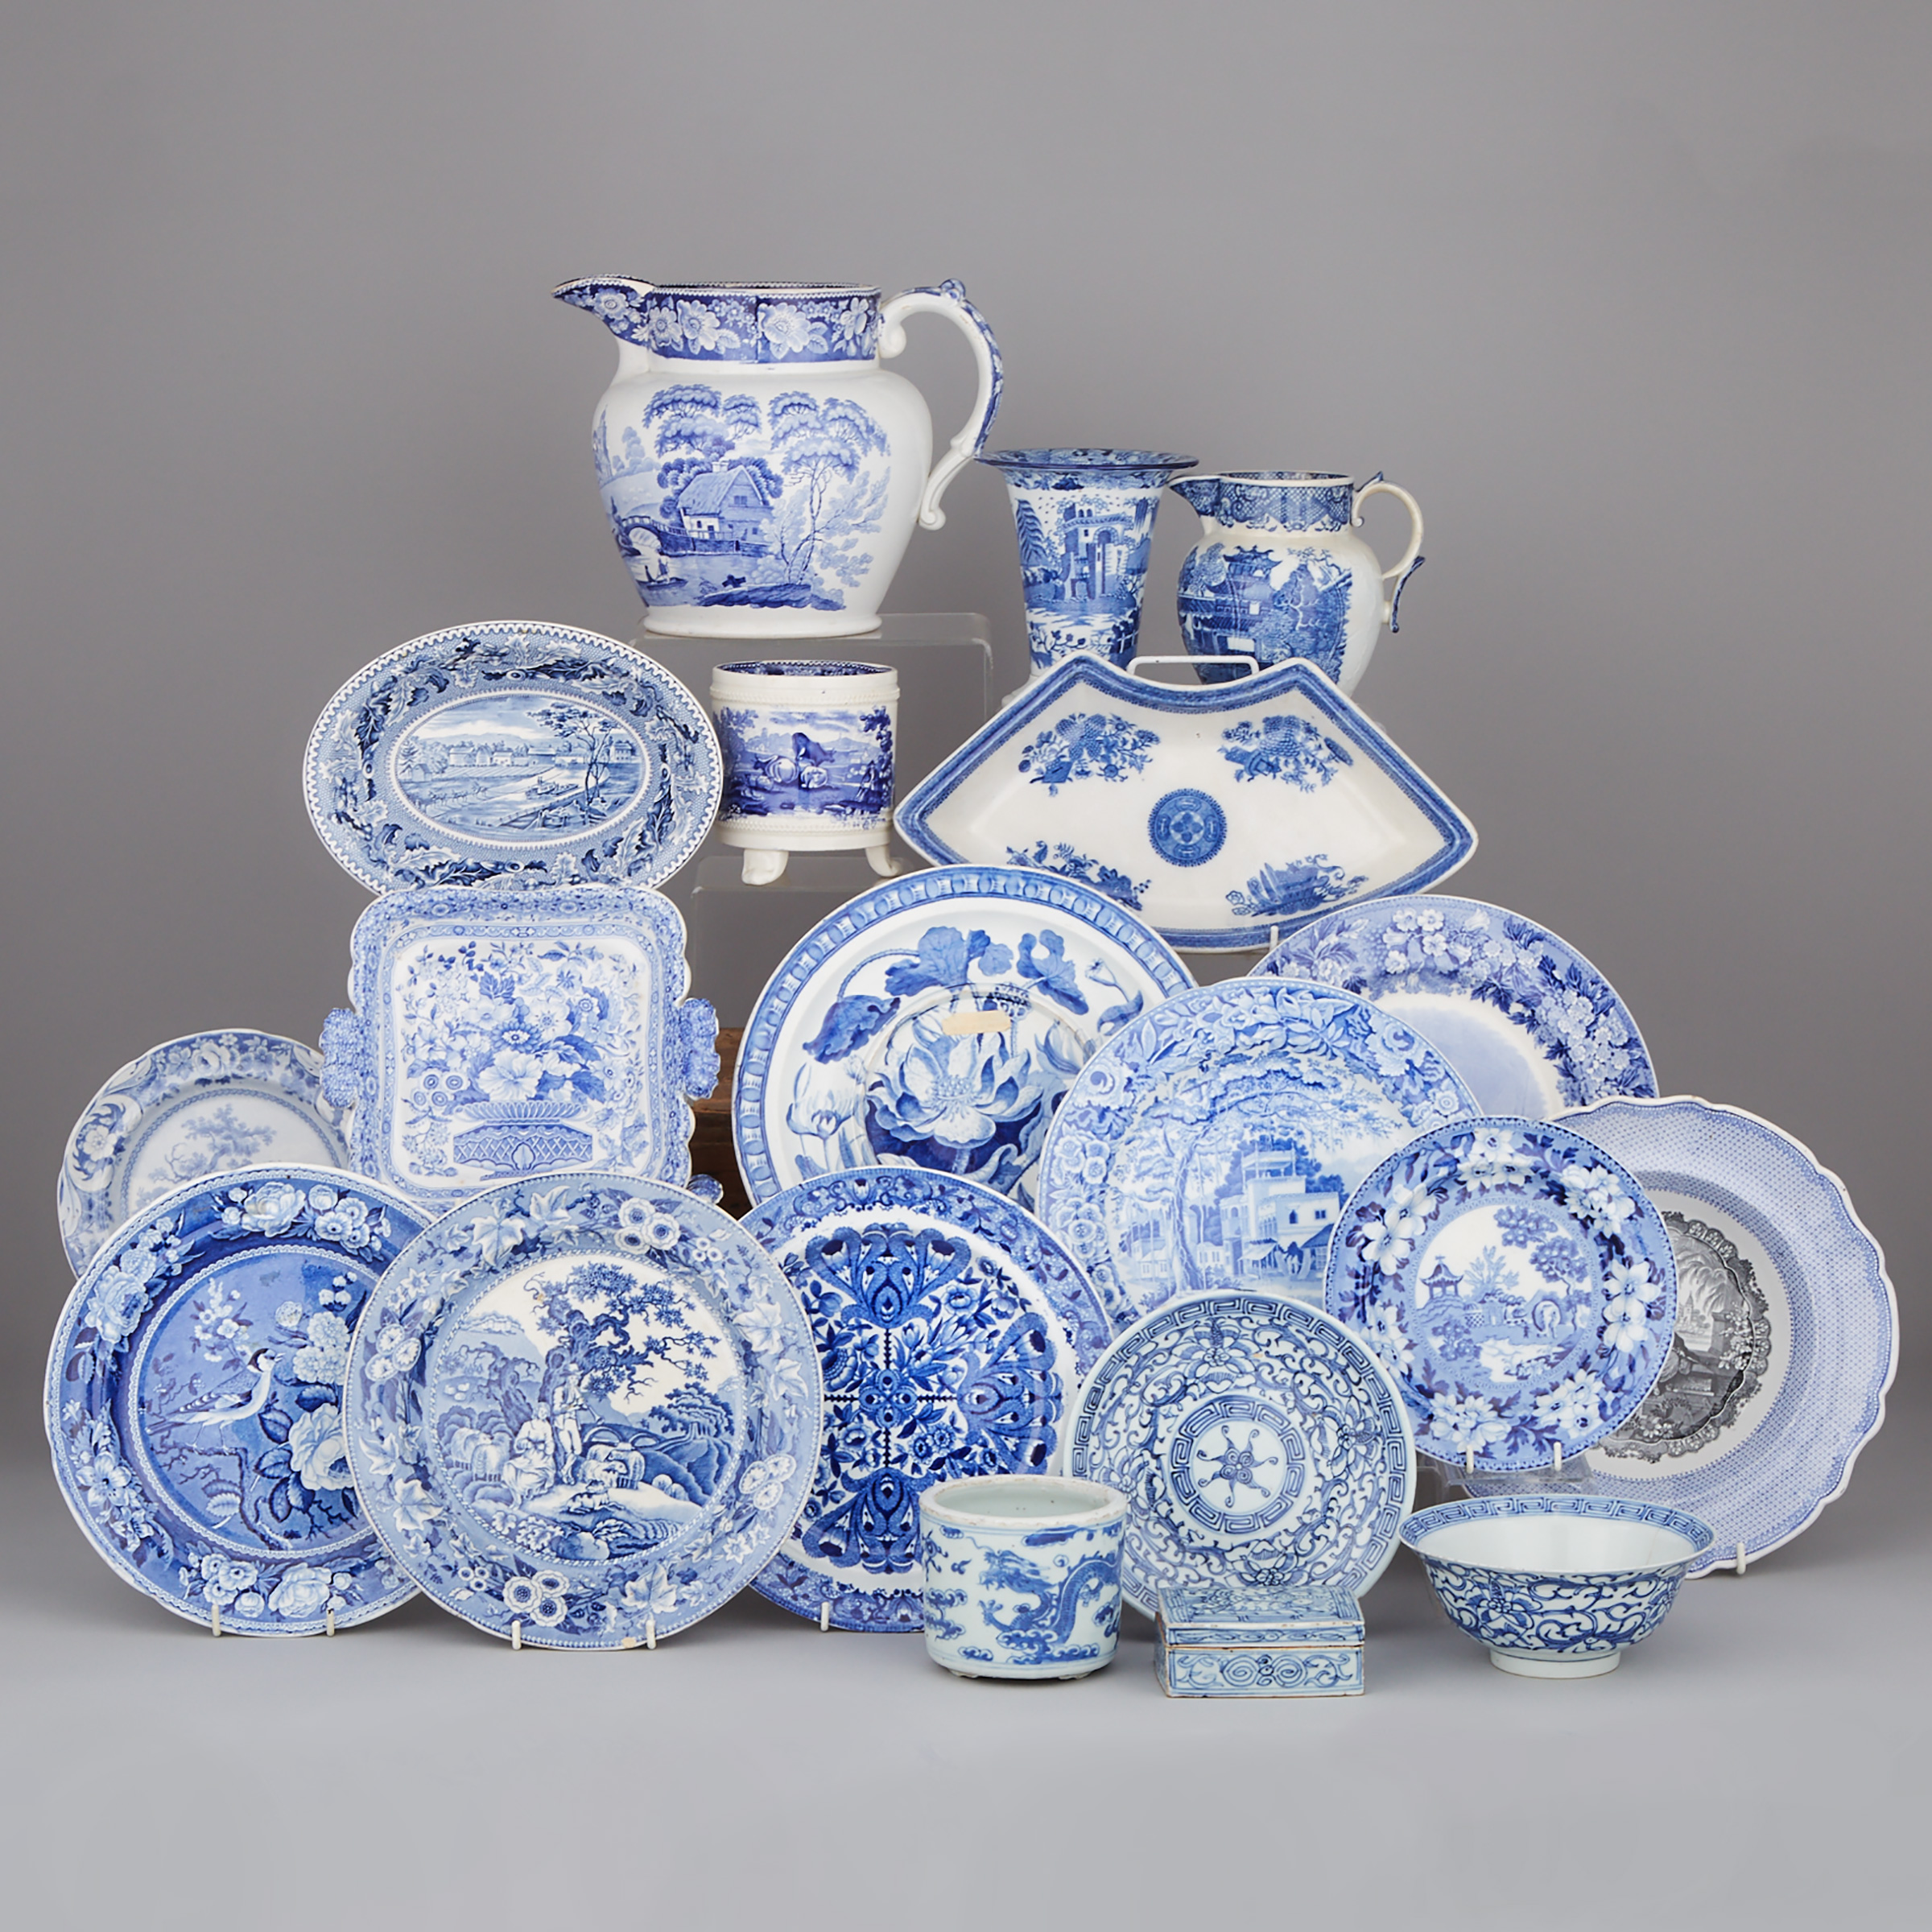 Group of Mainly English Blue Printed Pottery, 19th century